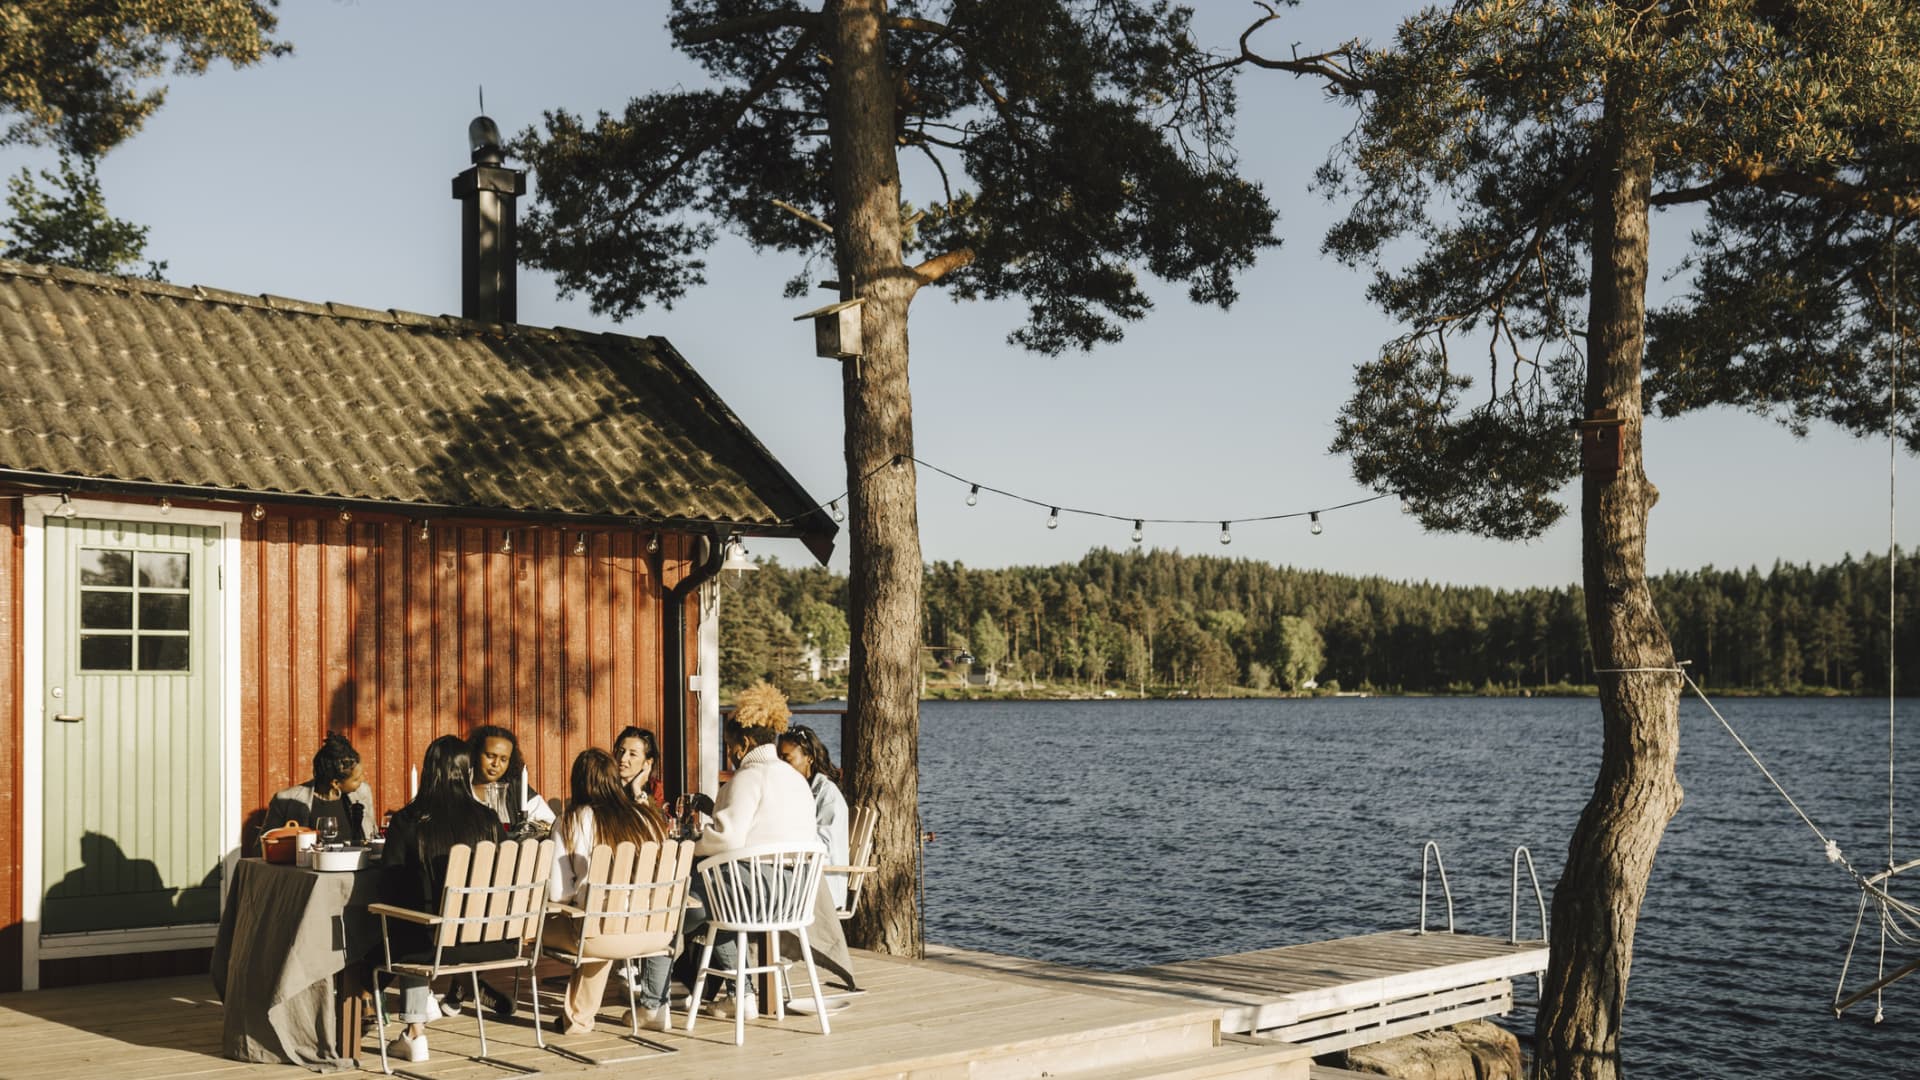 Top 10 places in the U.S. to buy a lake house in 2023